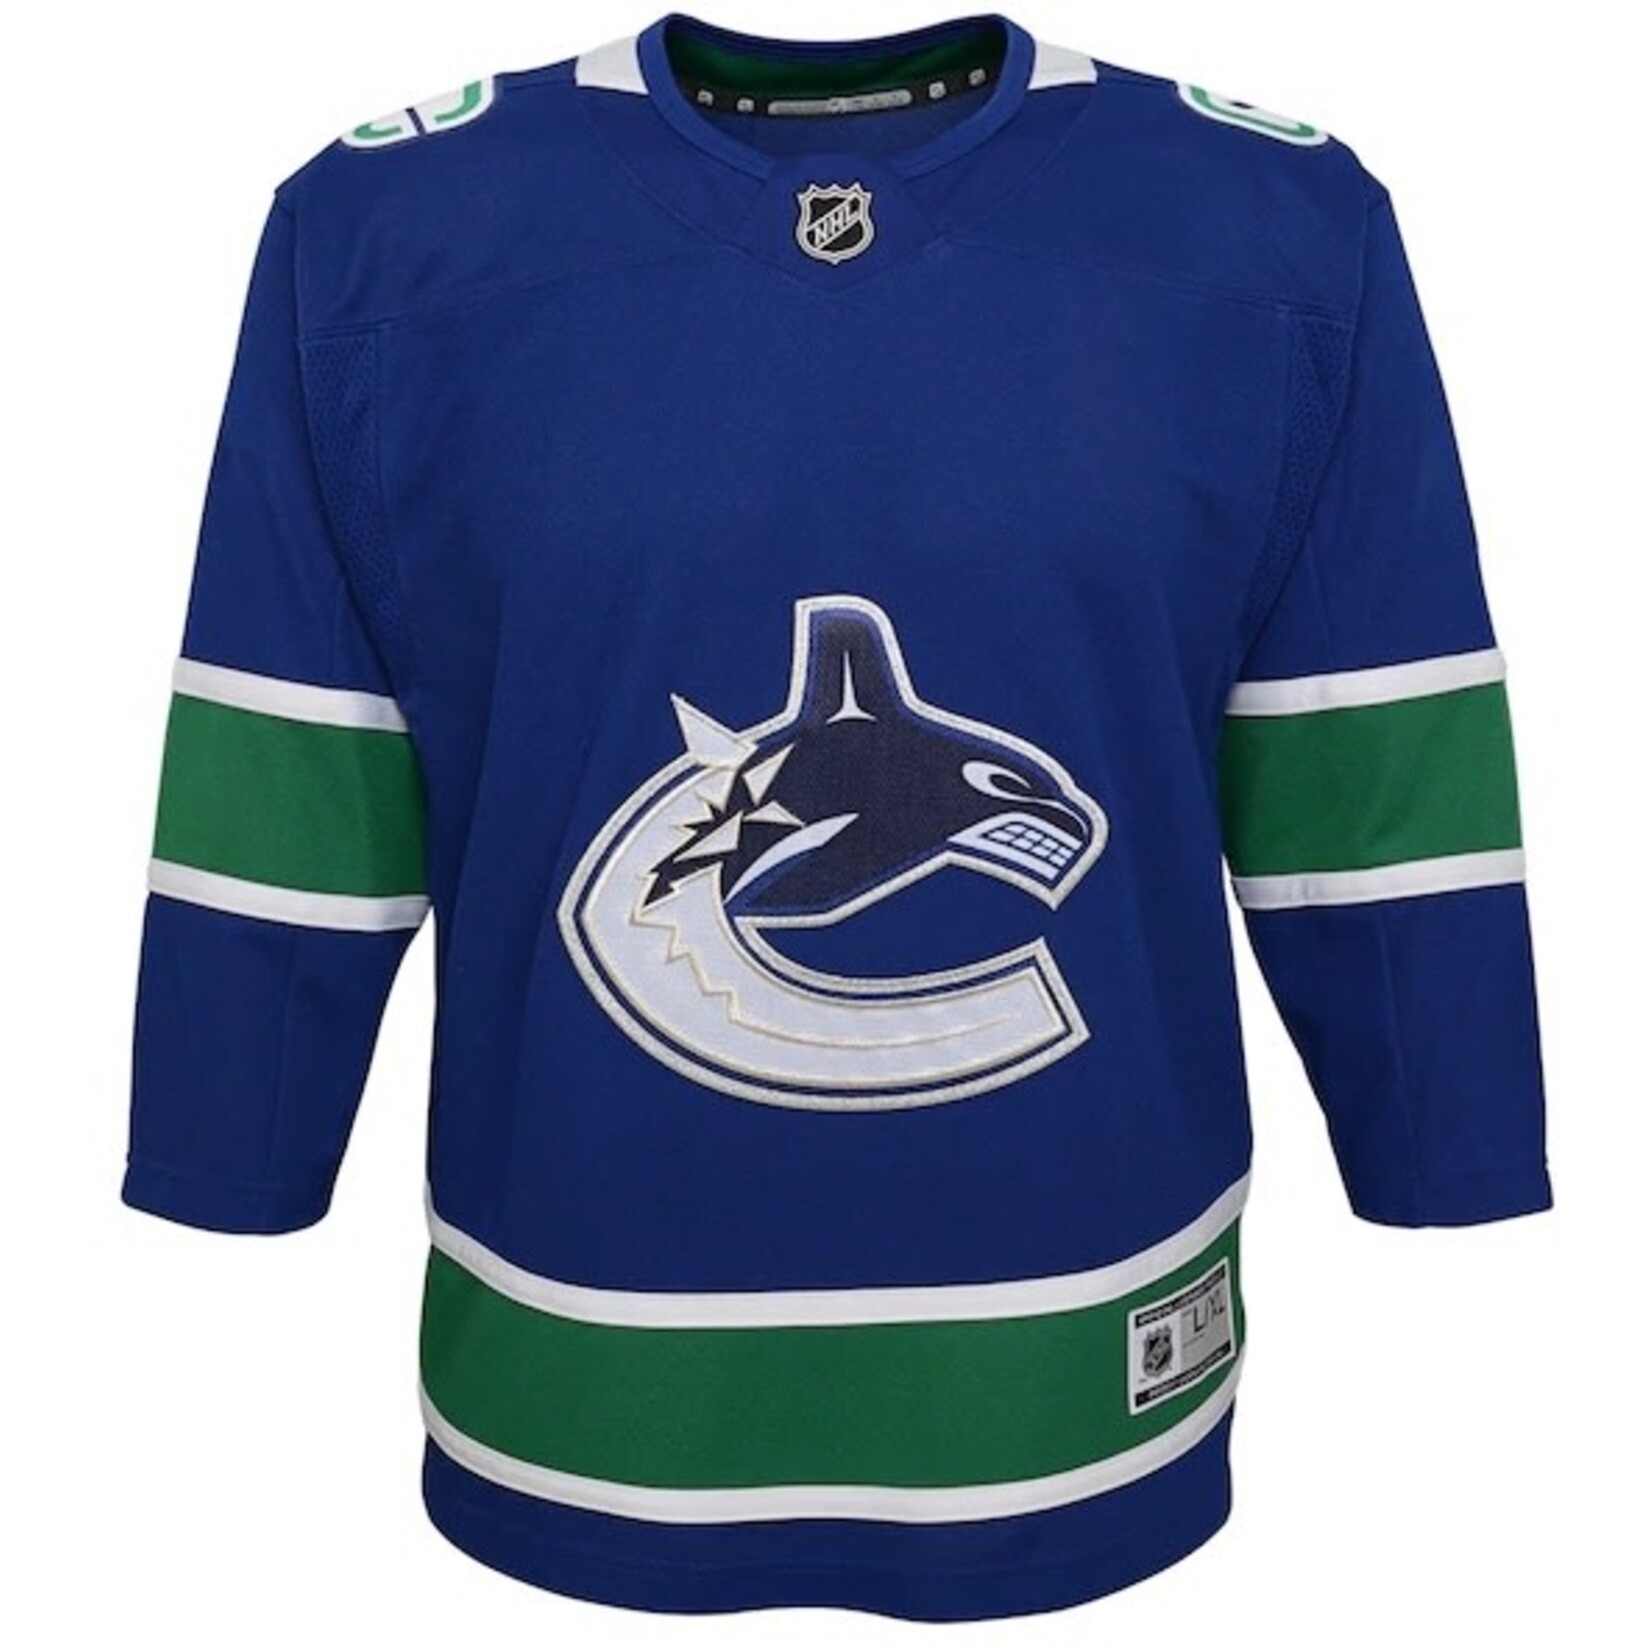 Outerstuff Outerstuff Hockey Jersey, Replica, Home, NHL, Youth, Vancouver Canucks